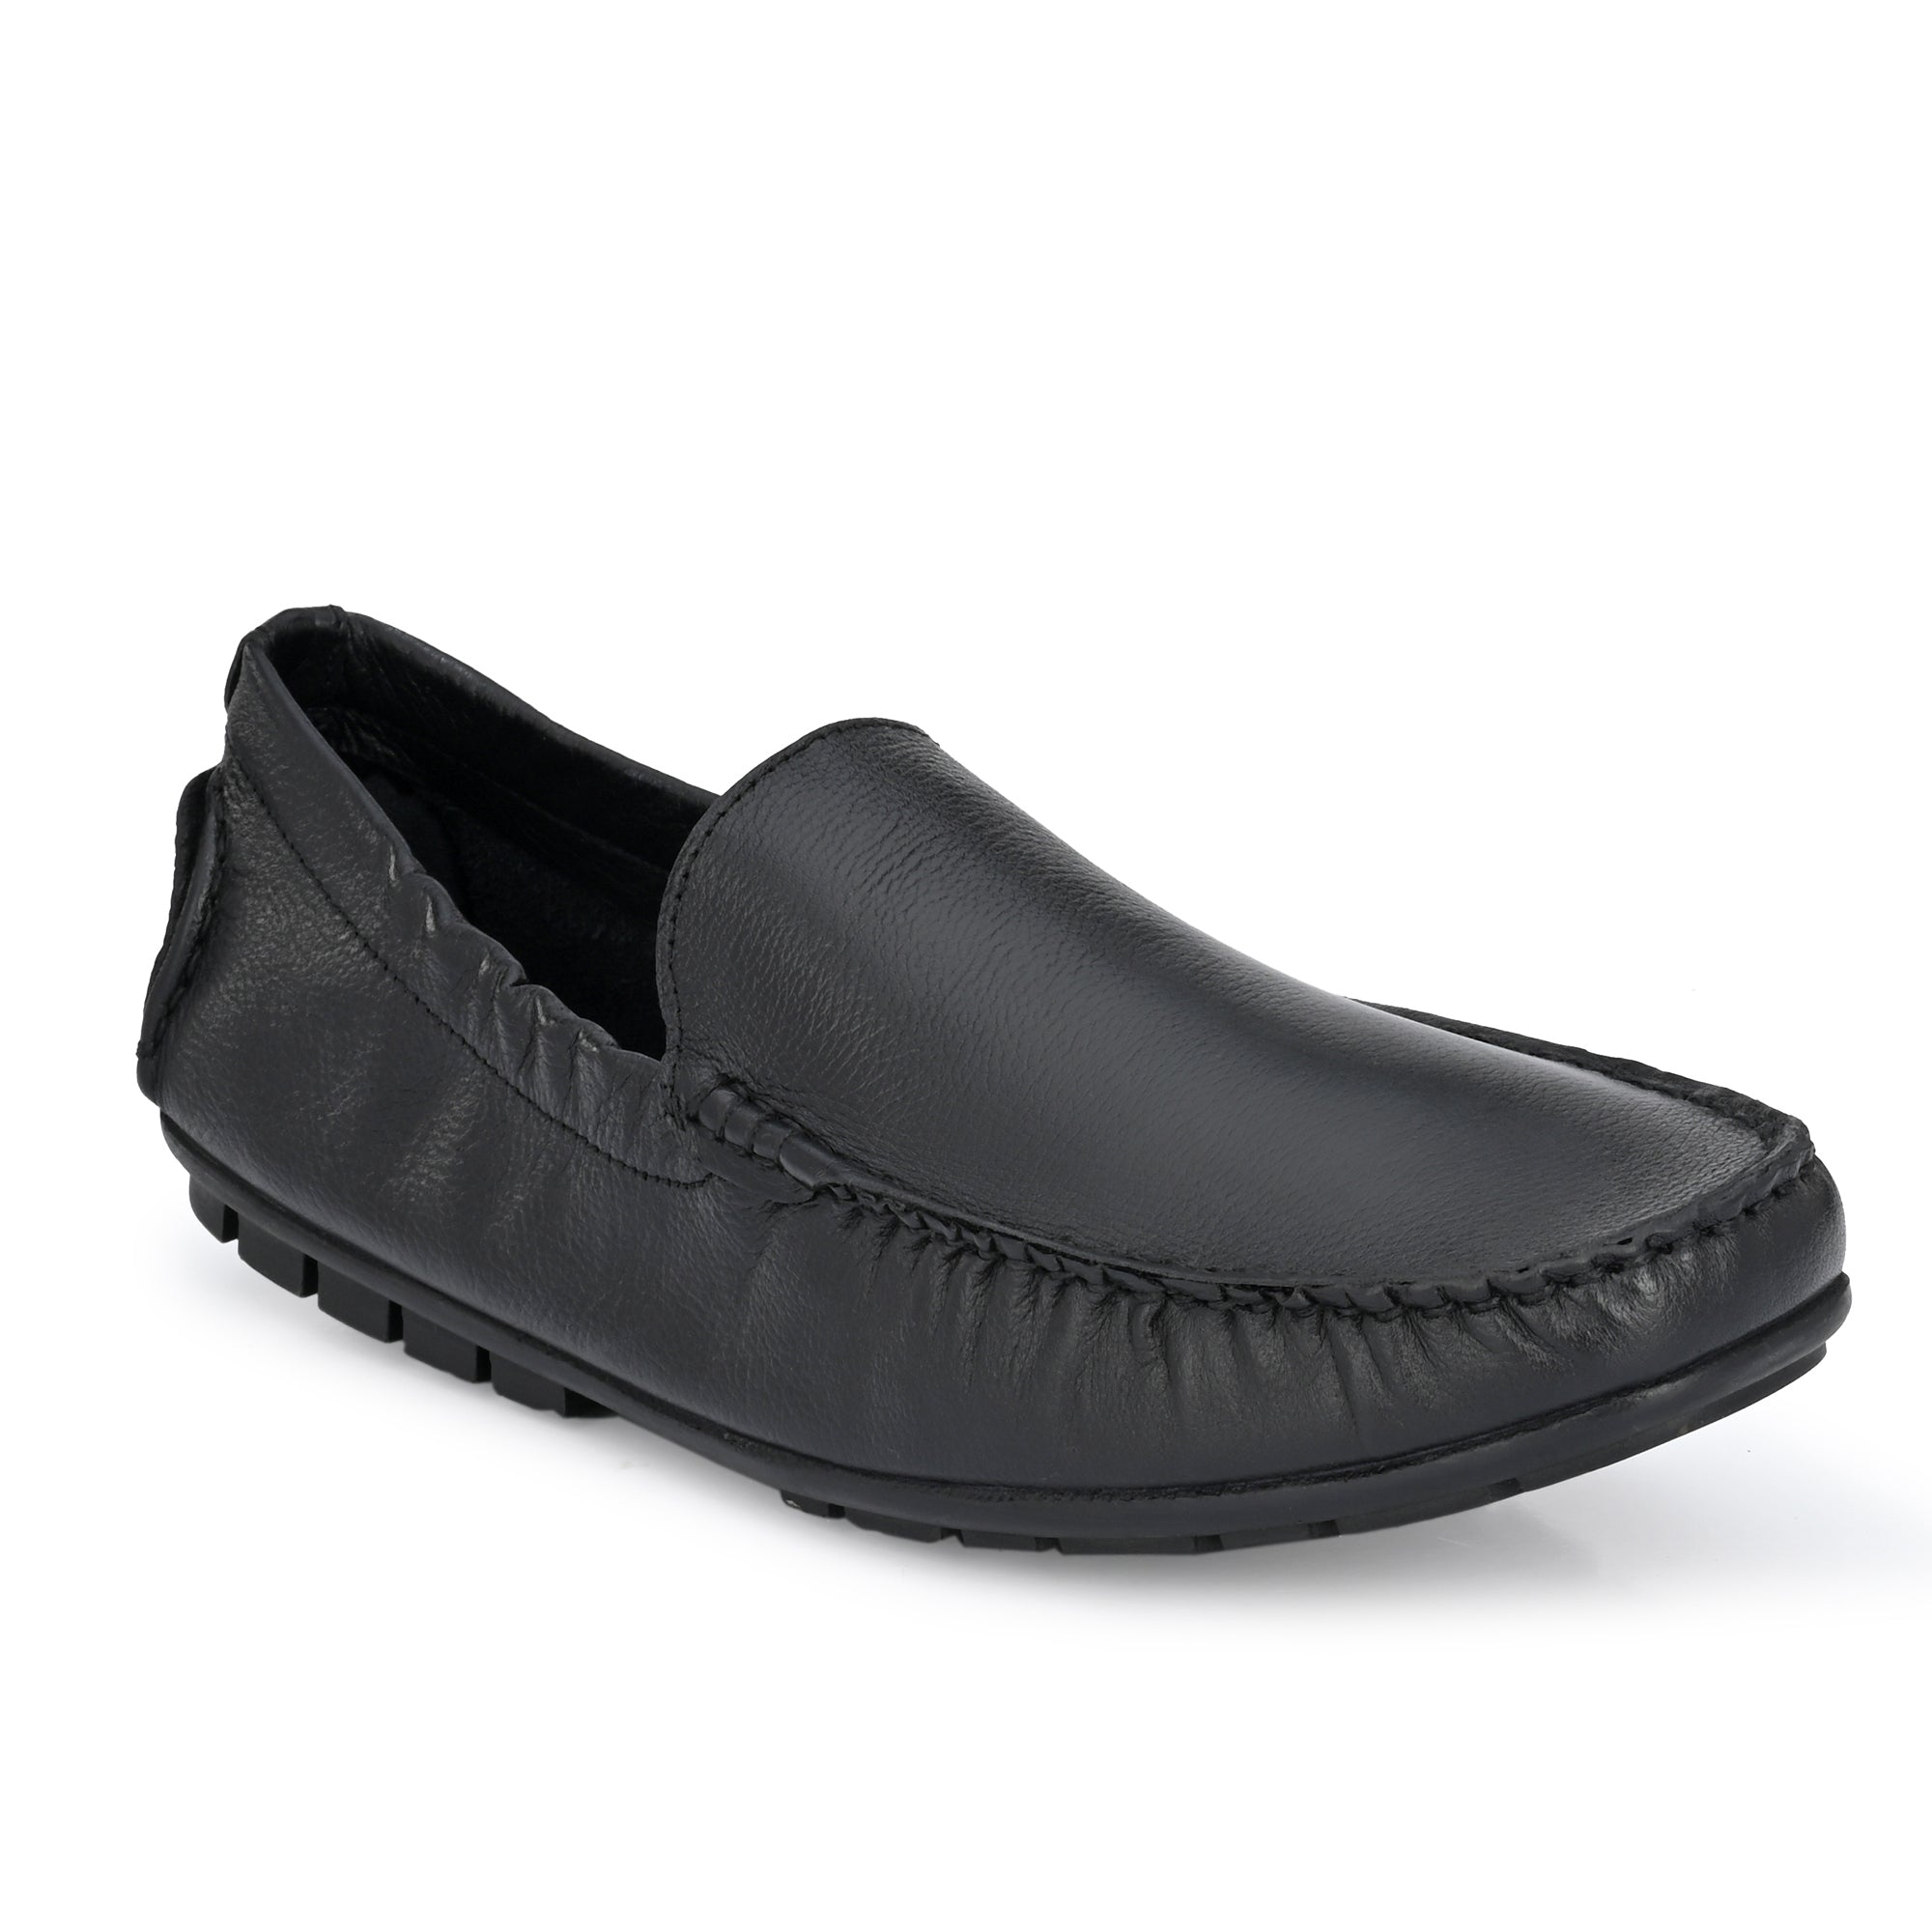 Egoss - The Ultimate Leather Socks Loafers For Men